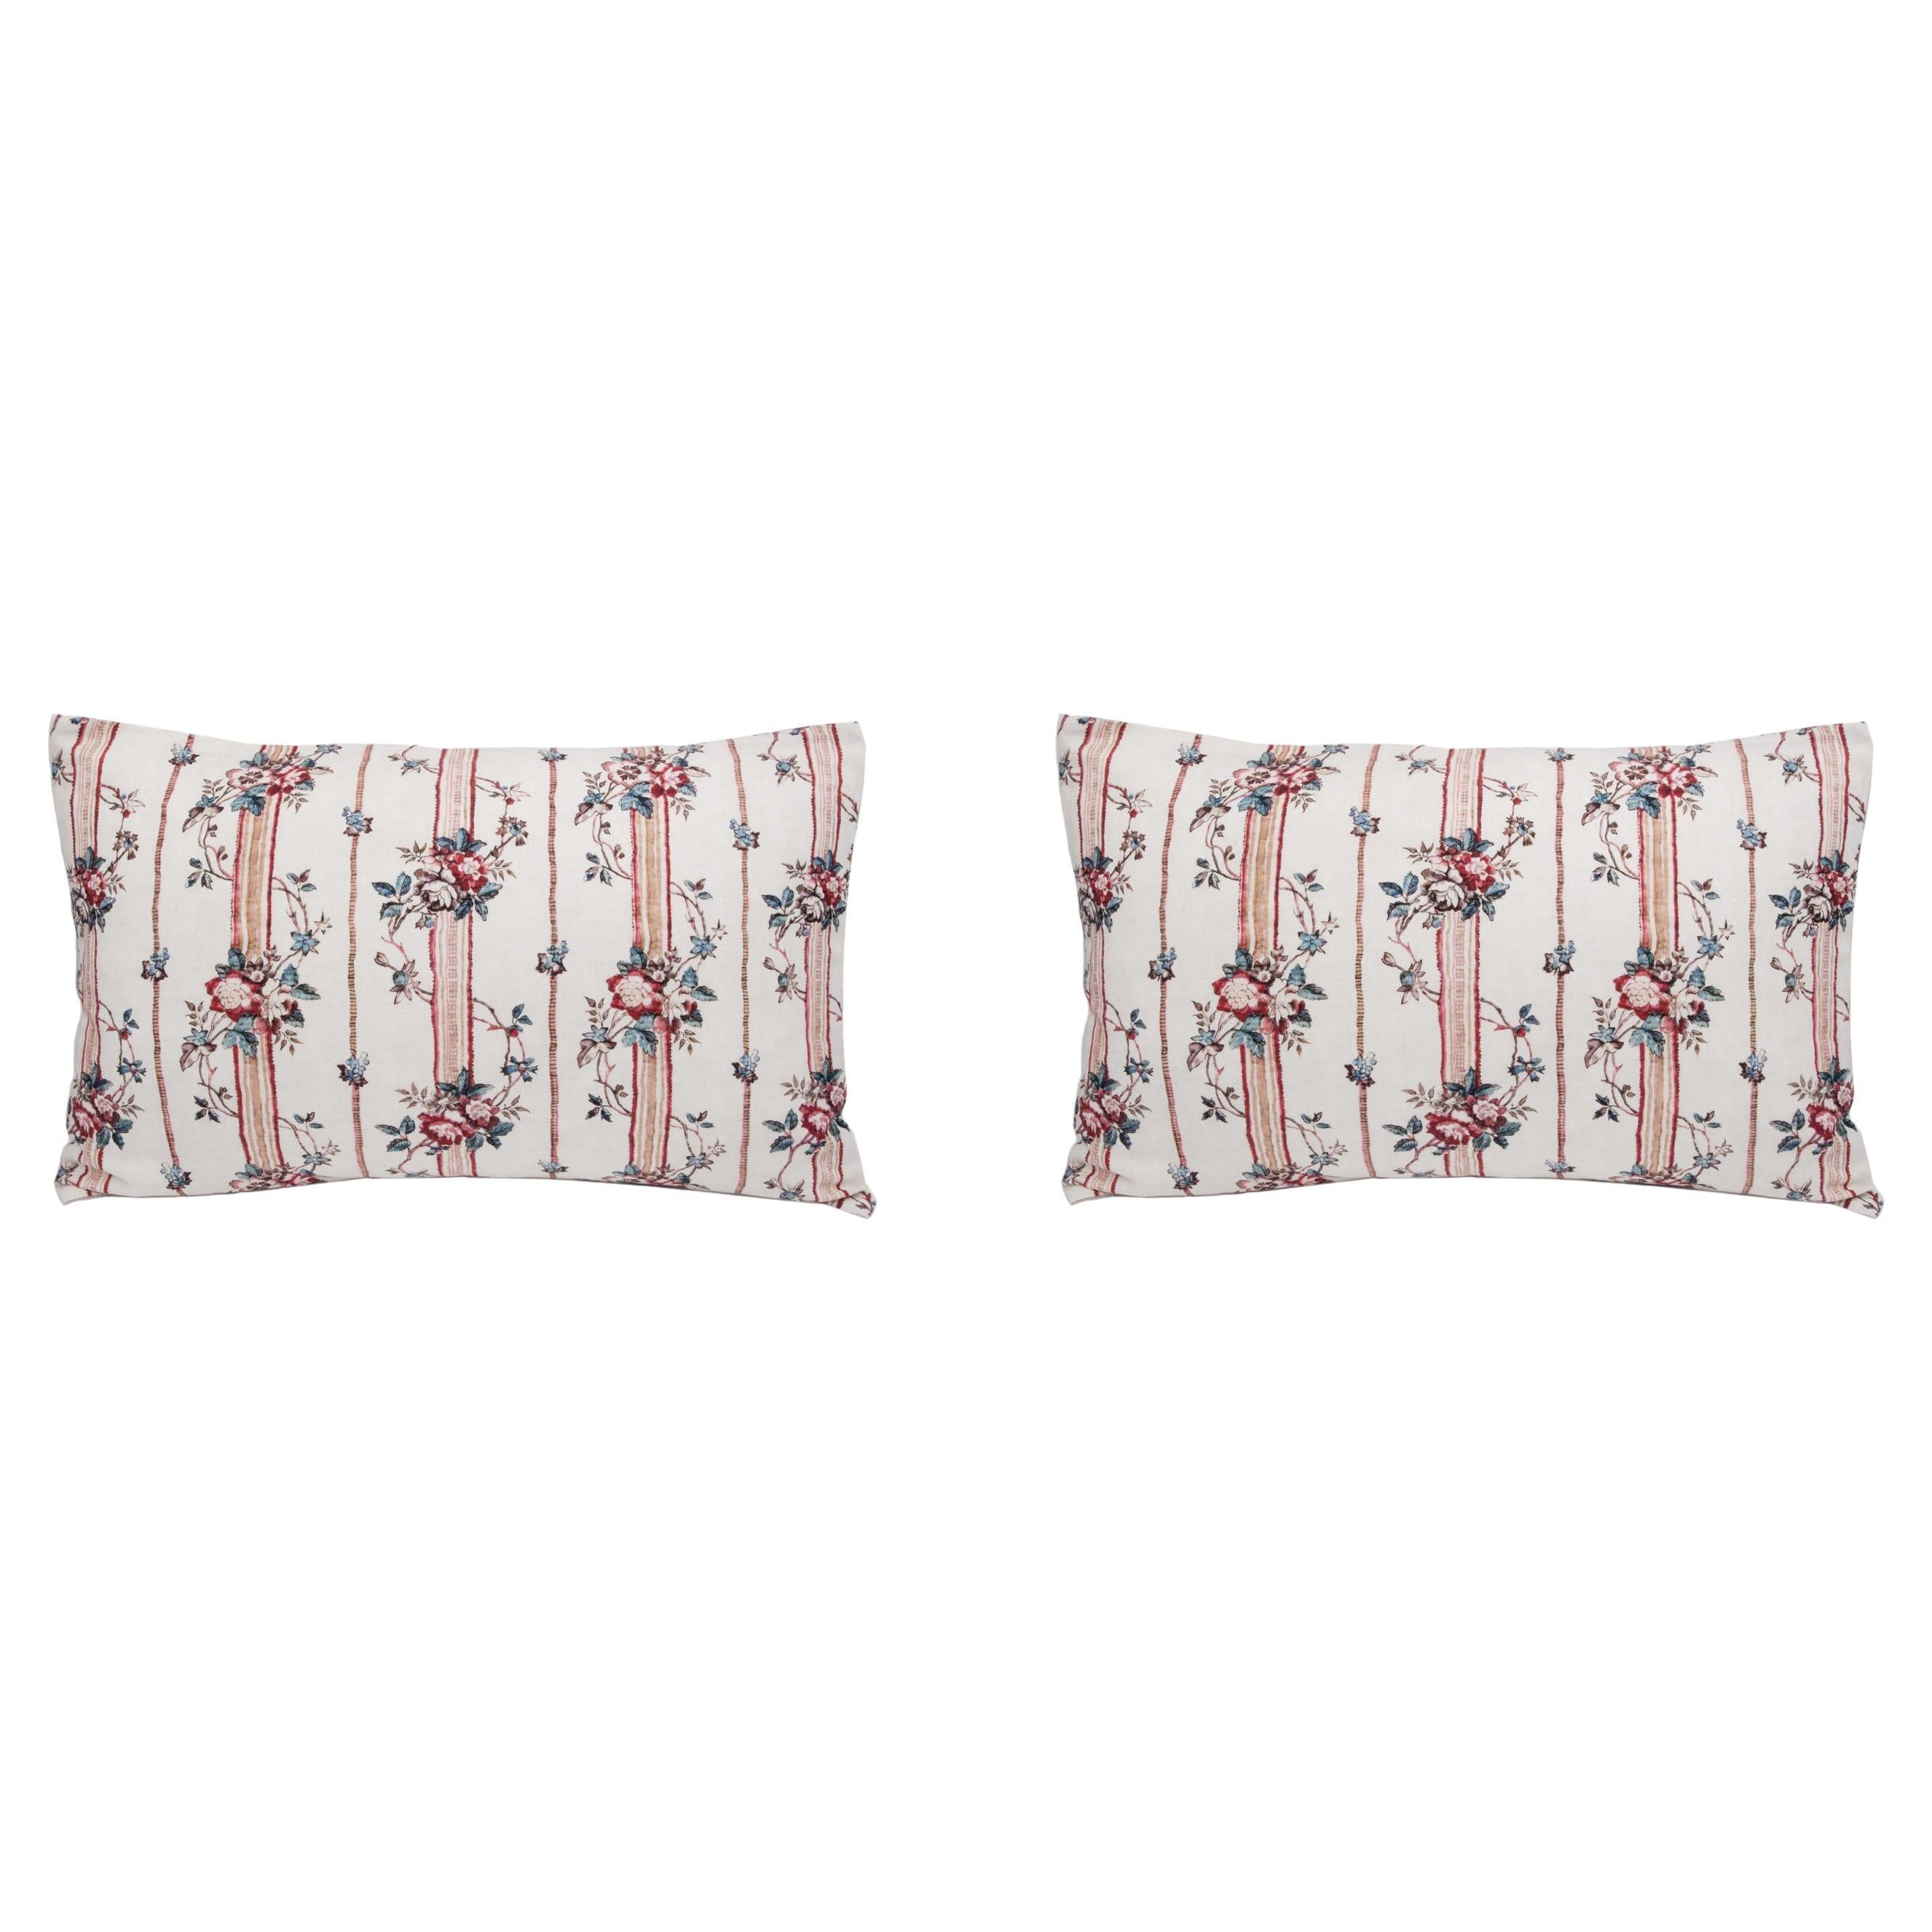 Pair of Large Linen Pillow Cushions - Rayures Provencale pattern - Made in Paris For Sale